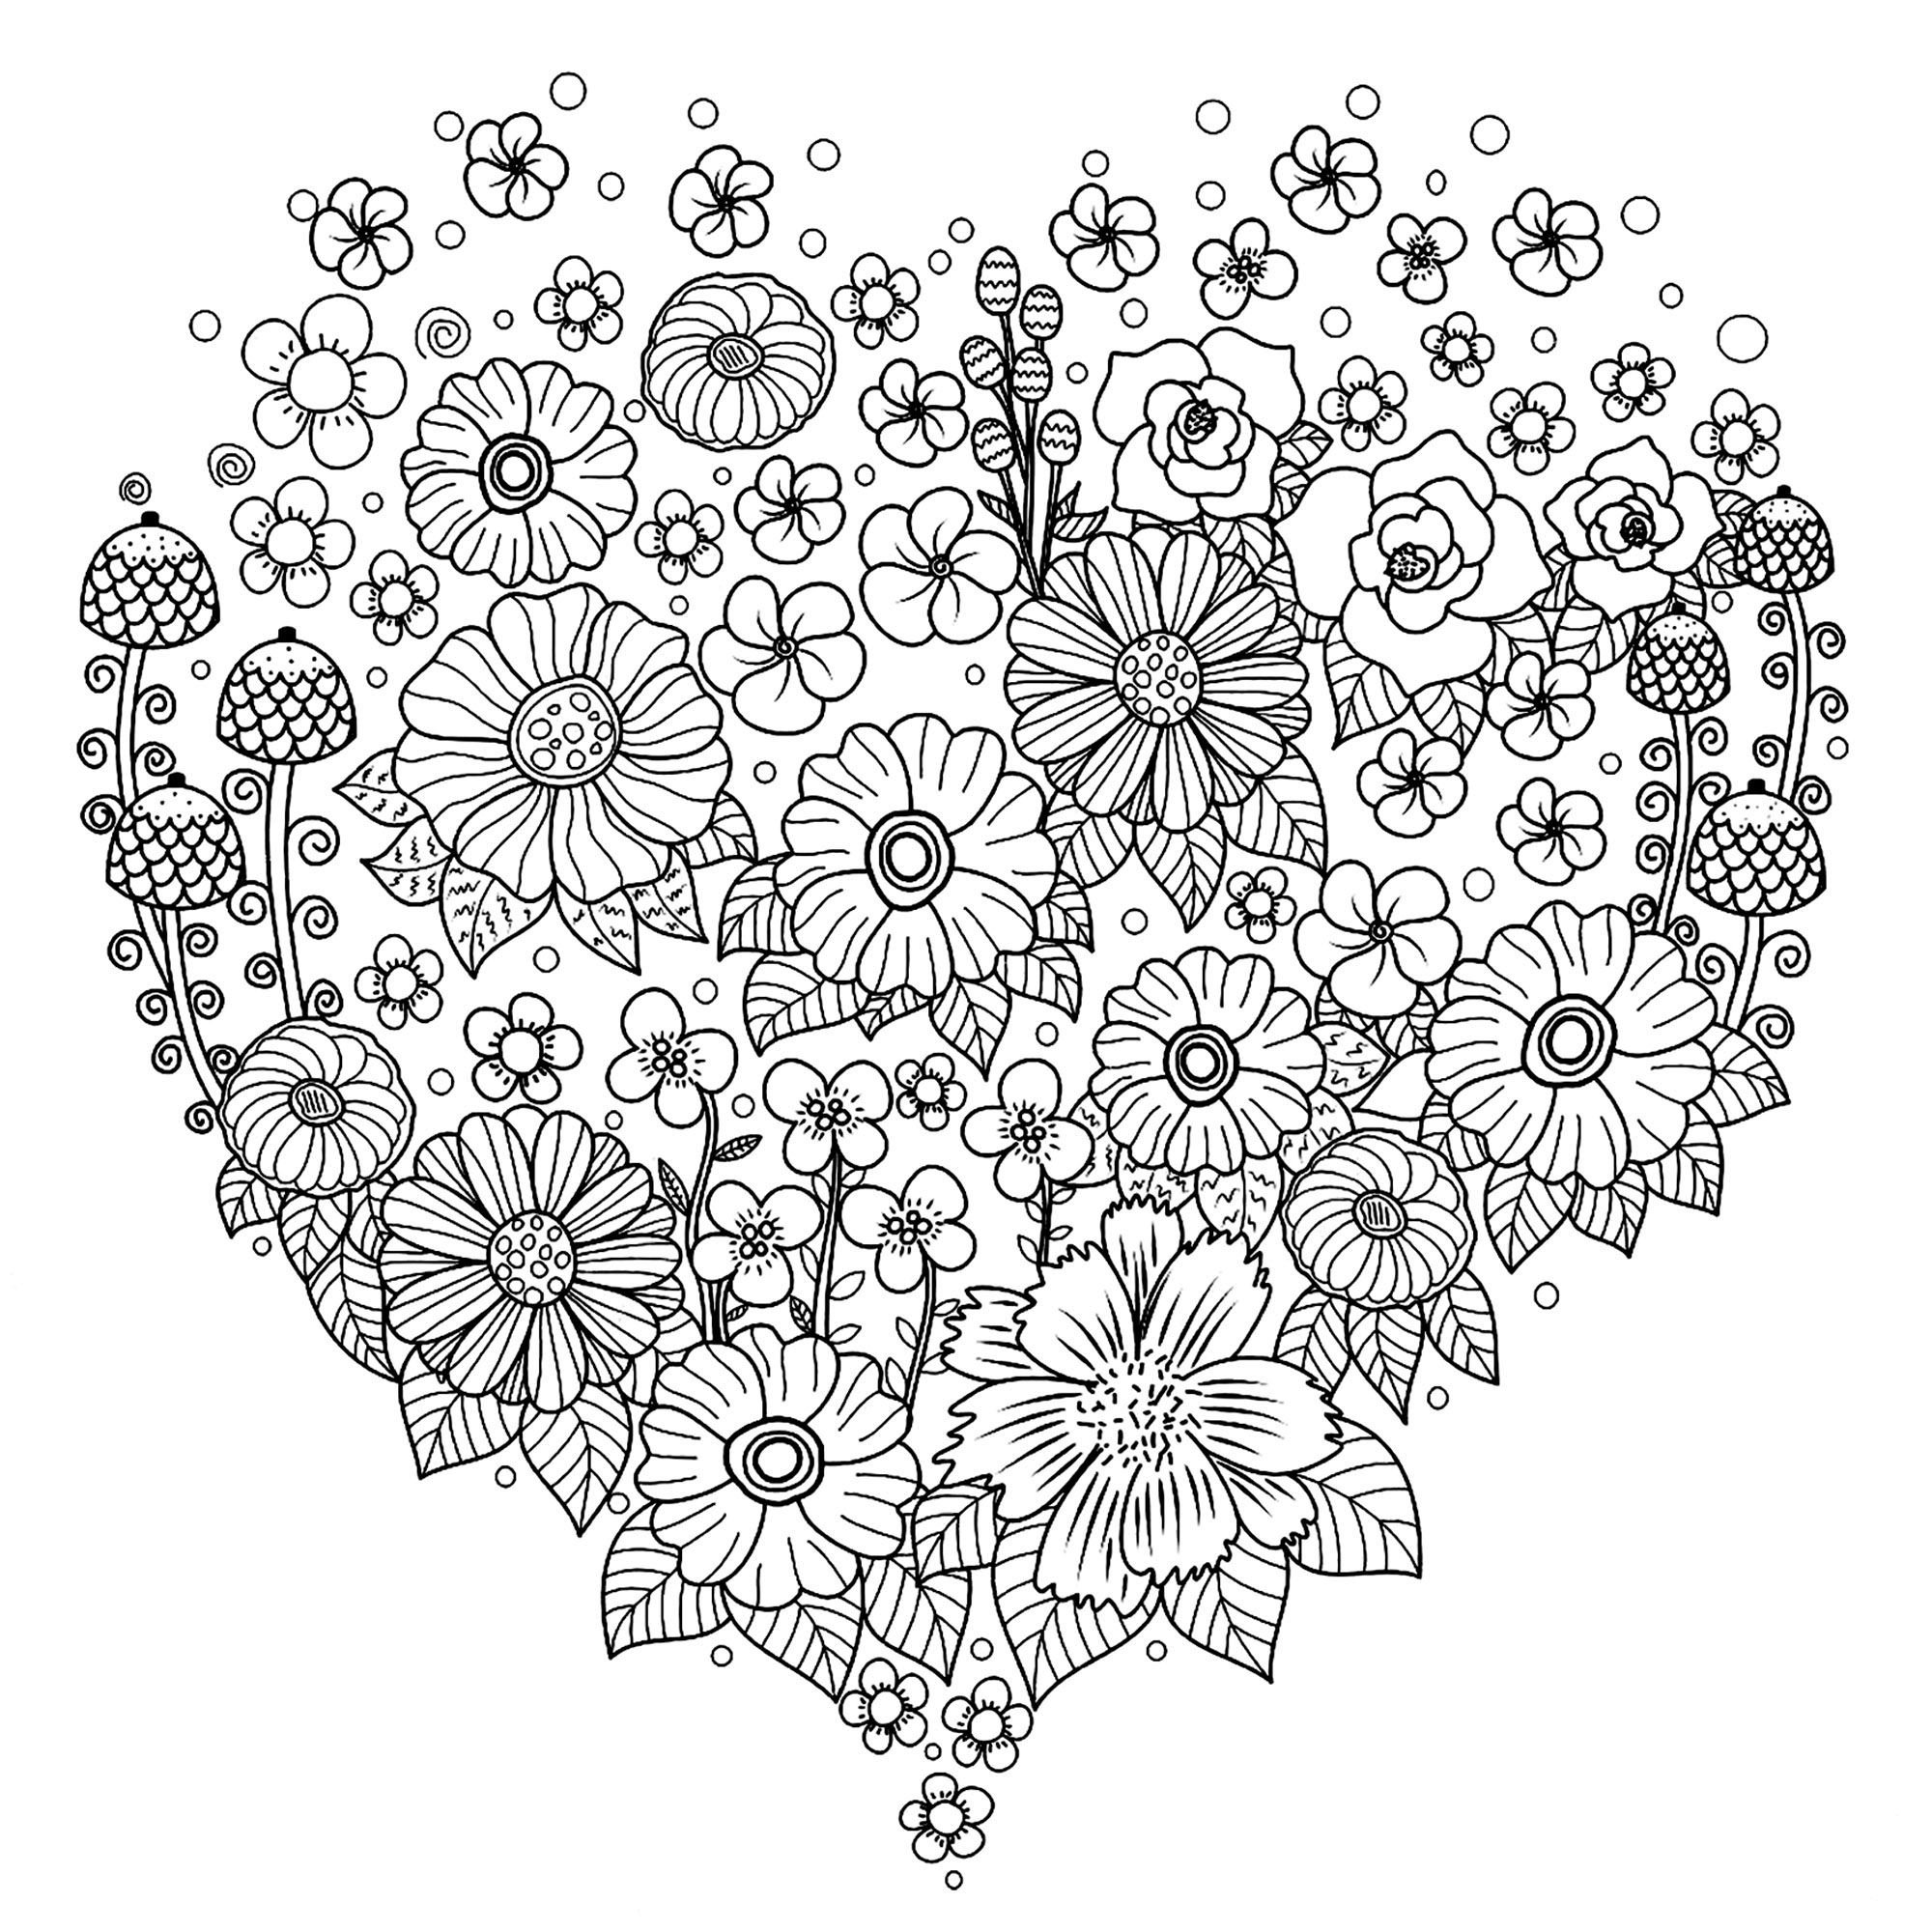 Heart with flowers - Flowers Adult Coloring Pages